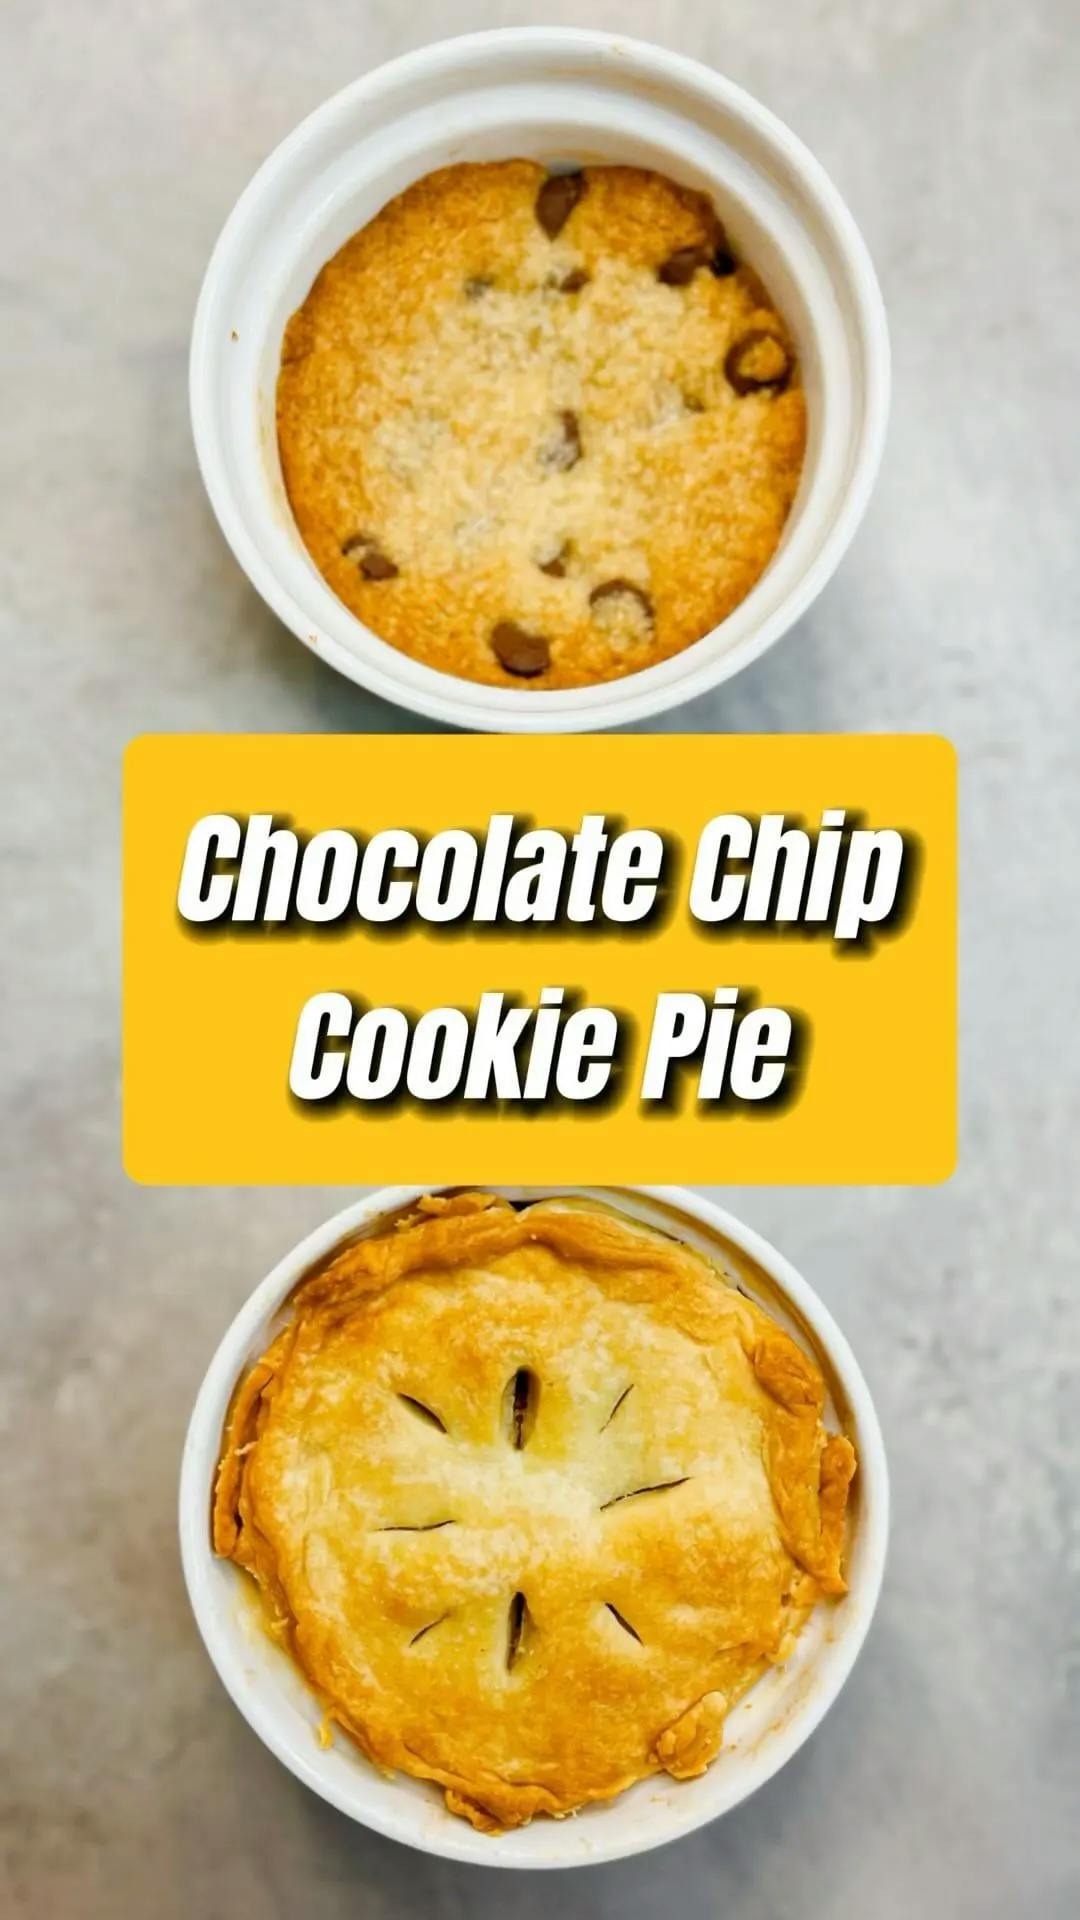 Picture for Chocolate Chip Cookie Pie